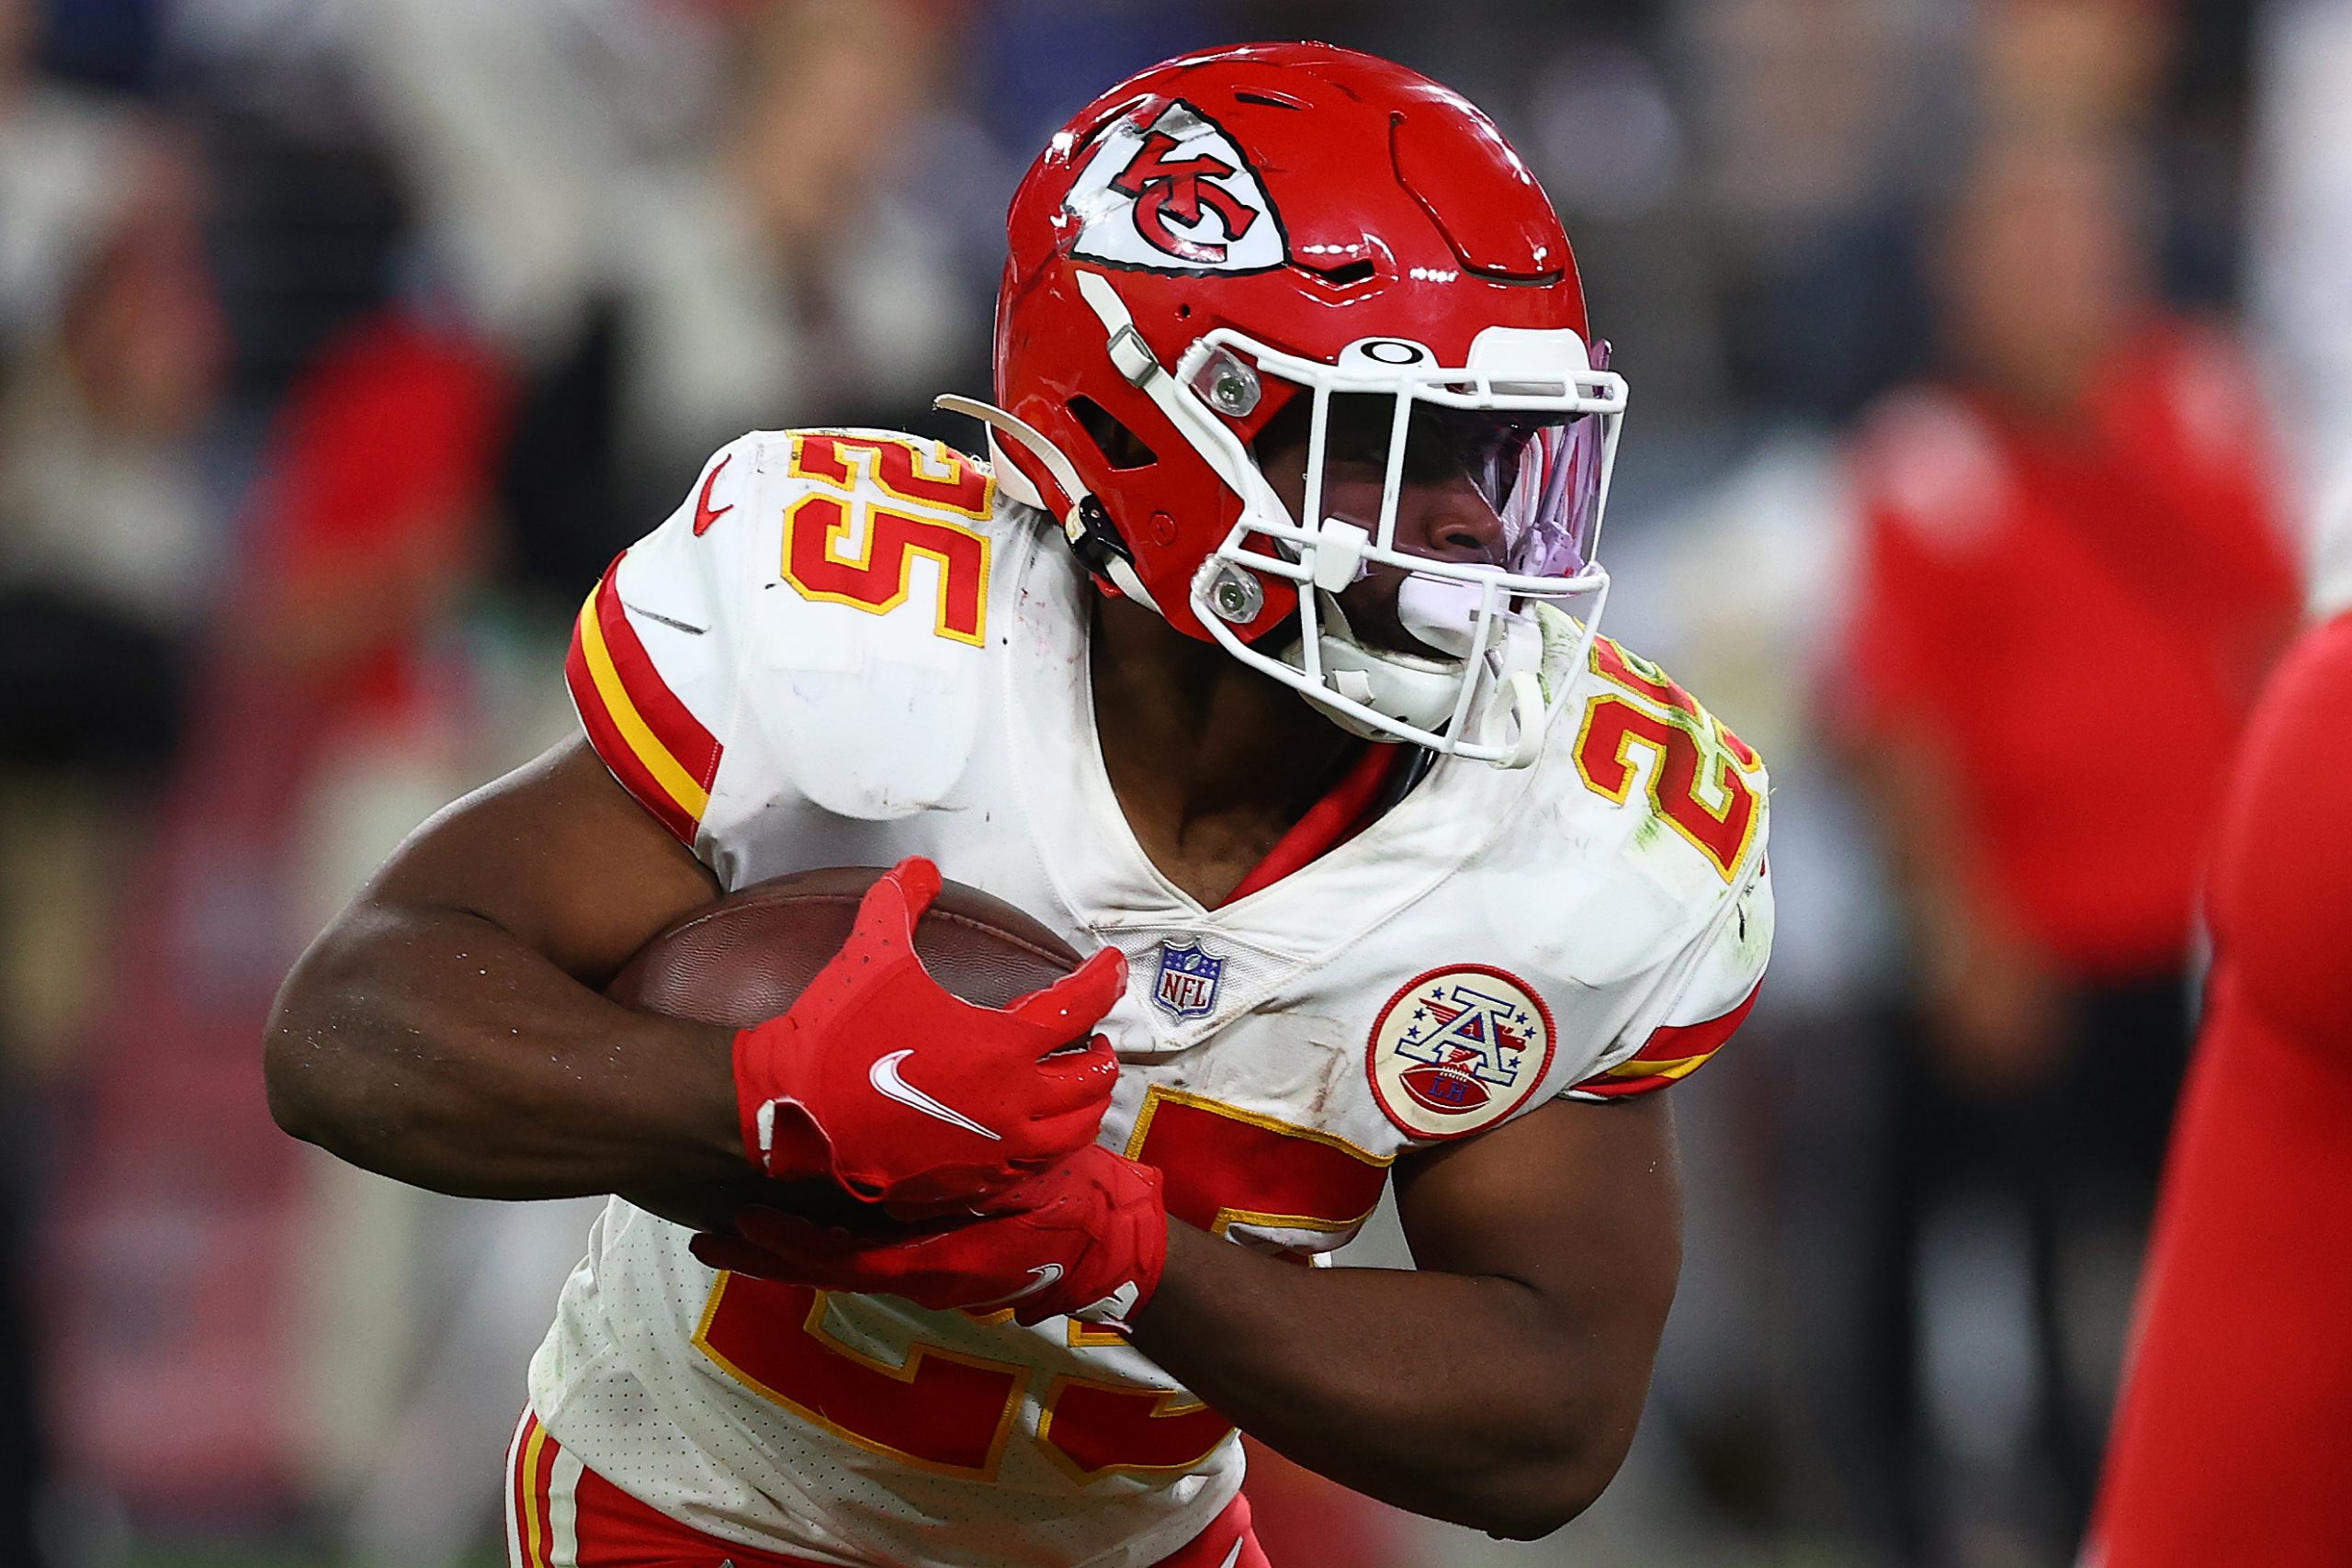 Clyde Edwards-Helaire of the Kansas City Chiefs runs with the ball against the Baltimore Ravens.